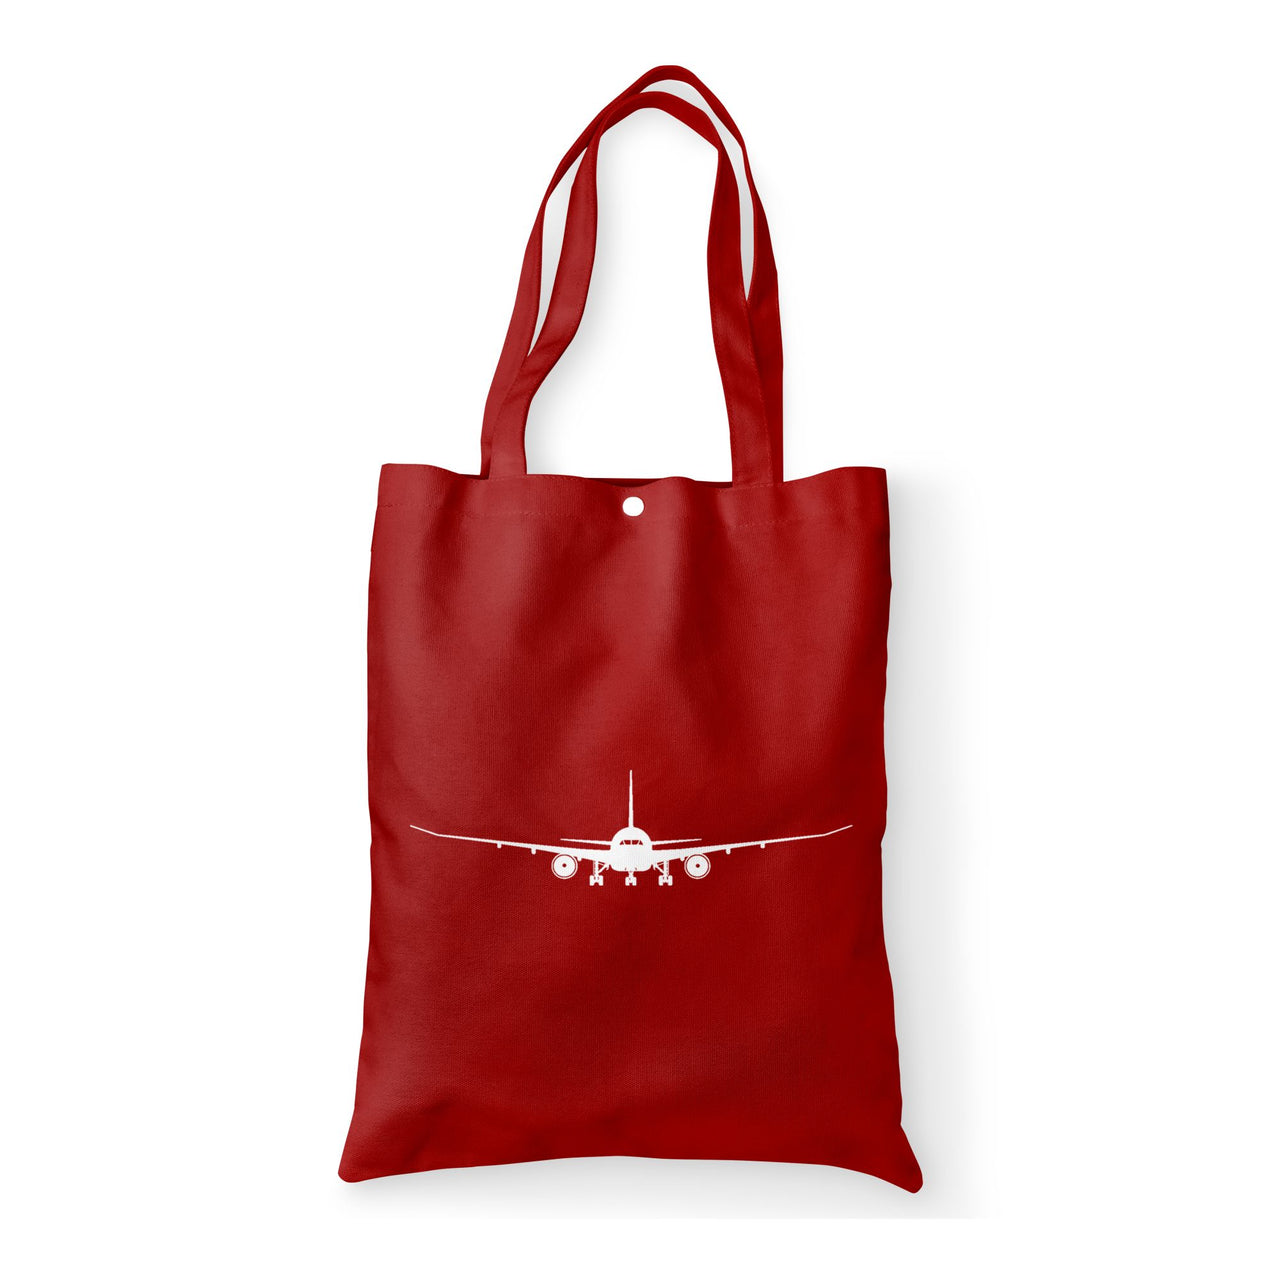 Boeing 787 Silhouette Designed Tote Bags